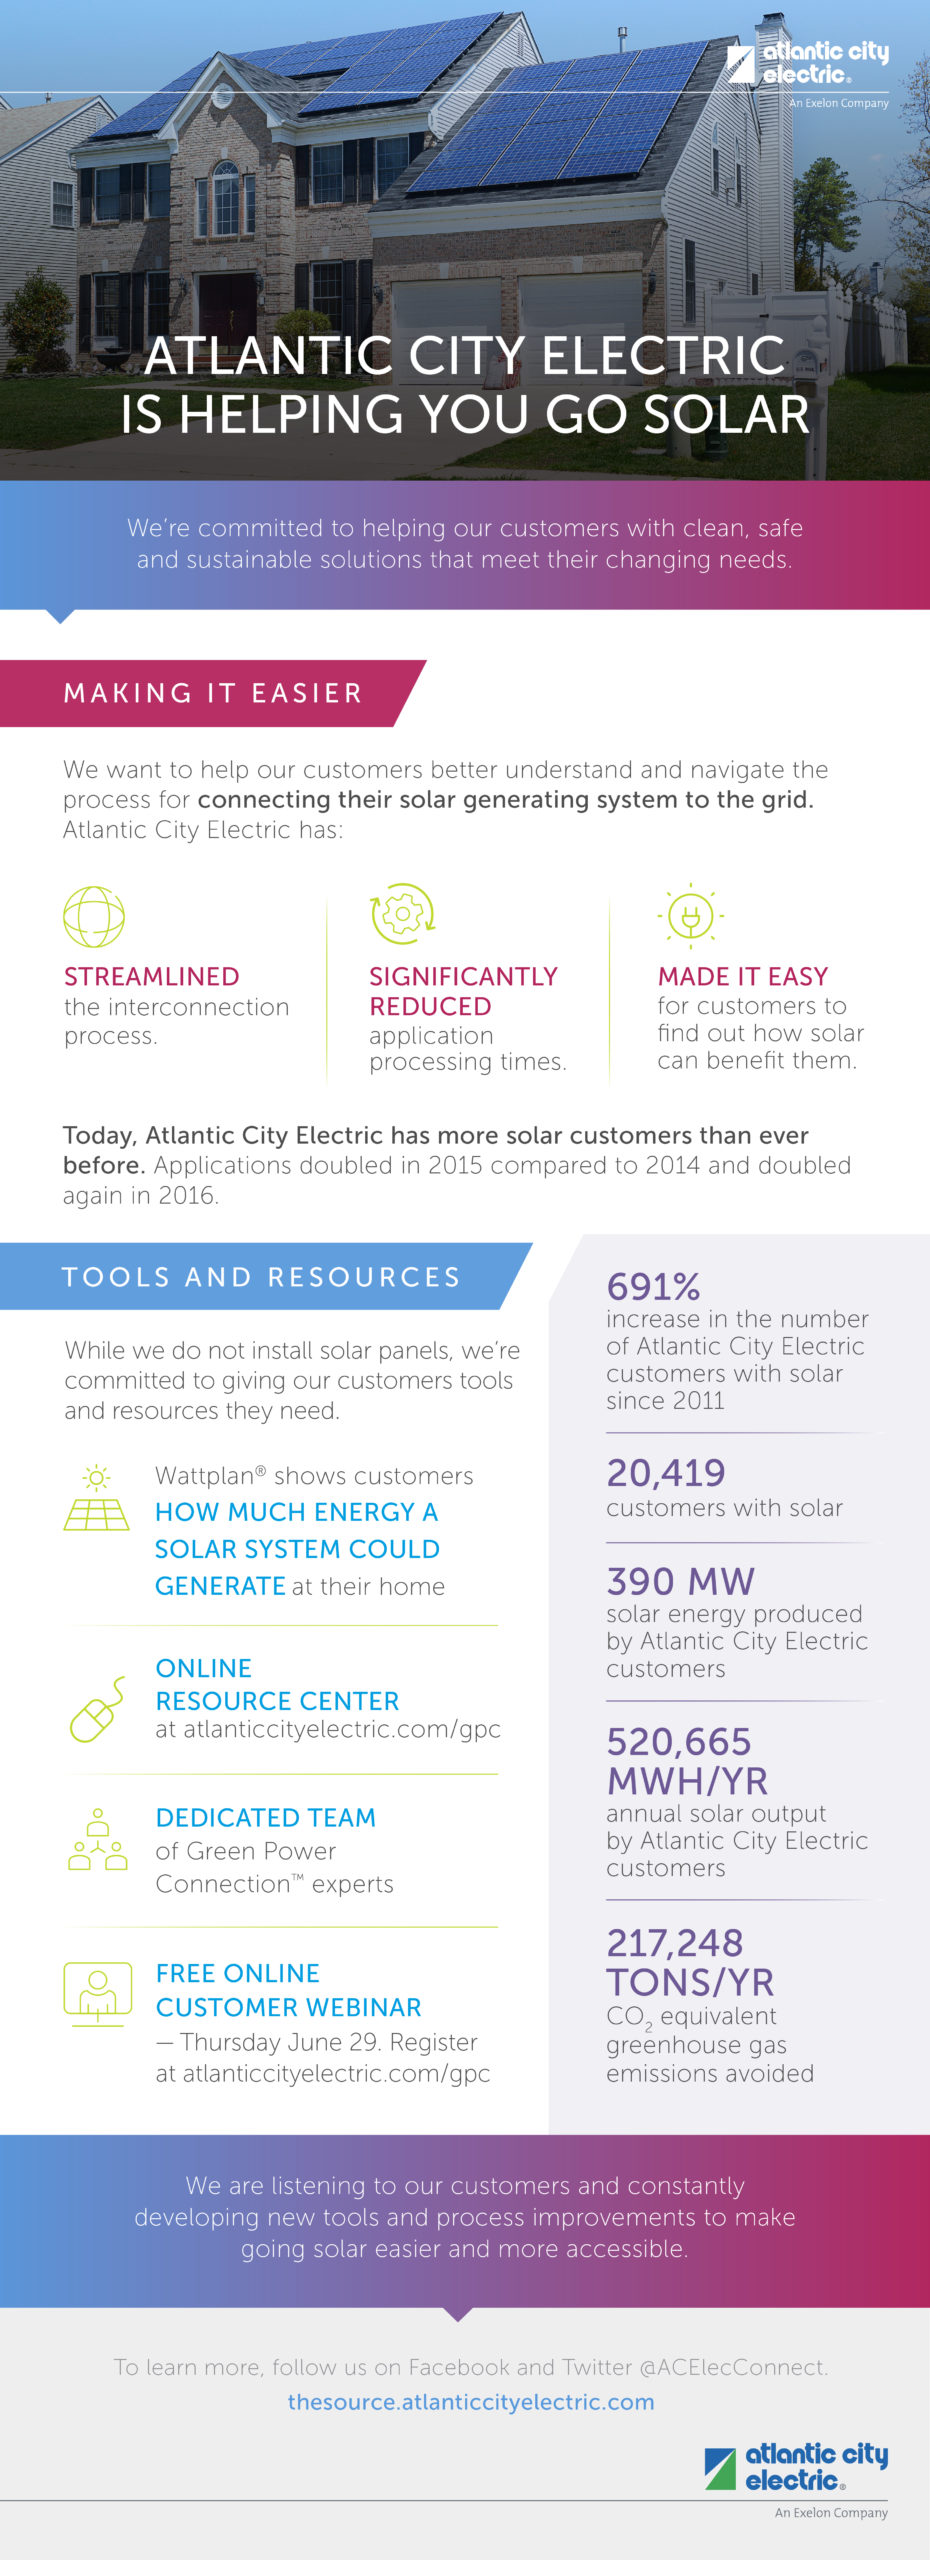 Atlantic City Electric is Helping You Go Solar